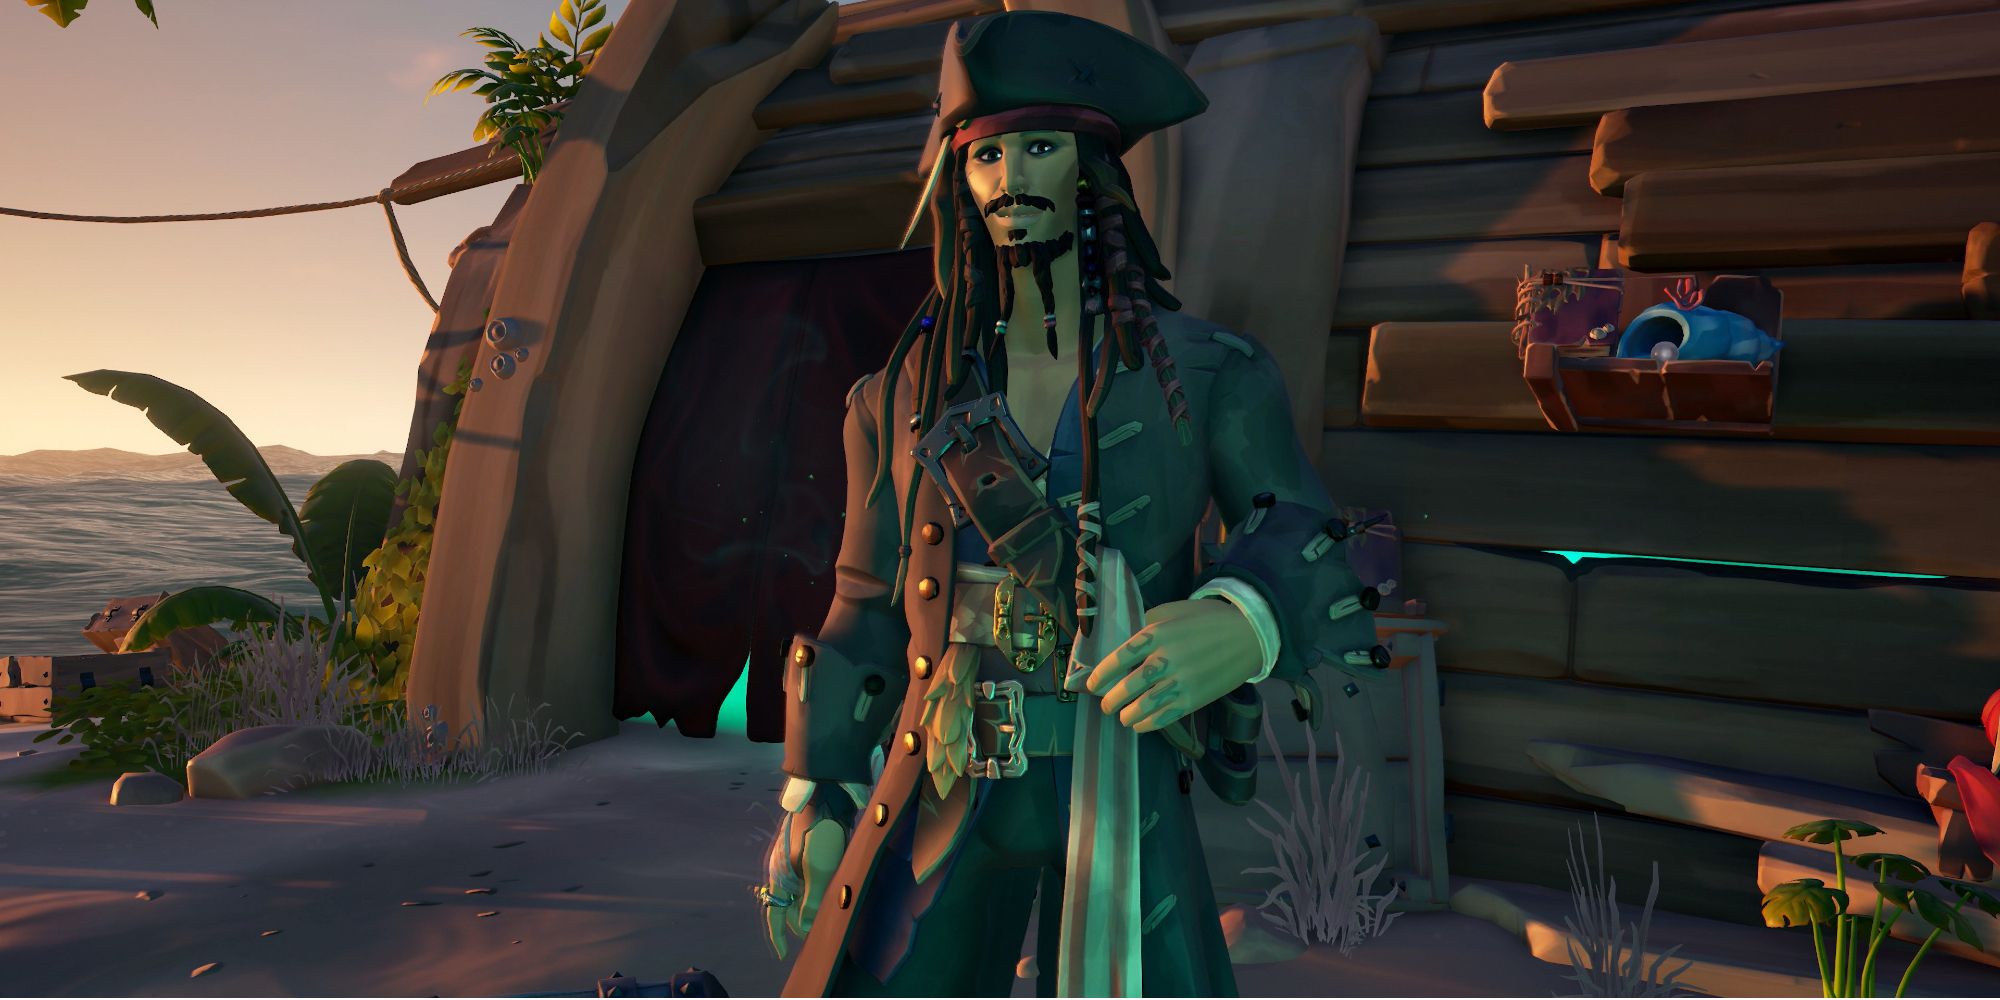 Great PvE Games - Sea of Thieves - Captain Jack Sparrow gets ready to go on an adventure